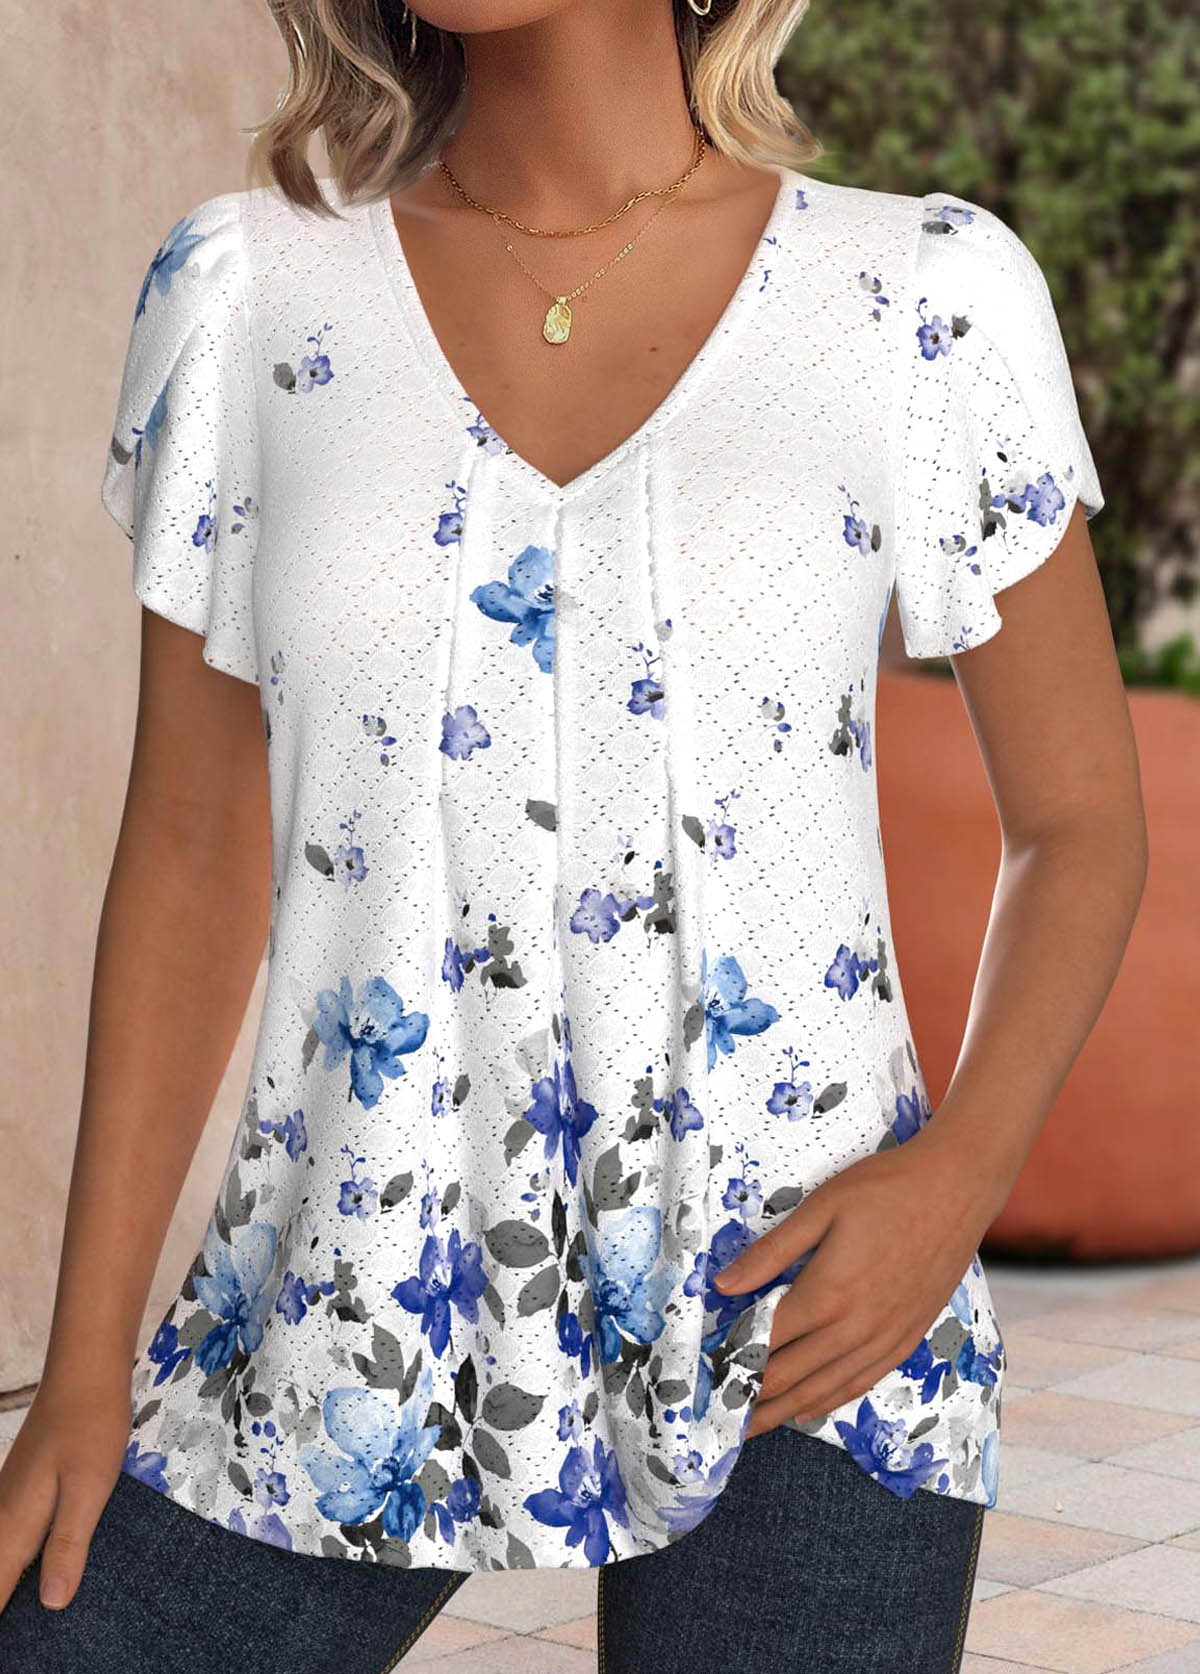 Floral Print Hollow Out White Short Sleeve T Shirt